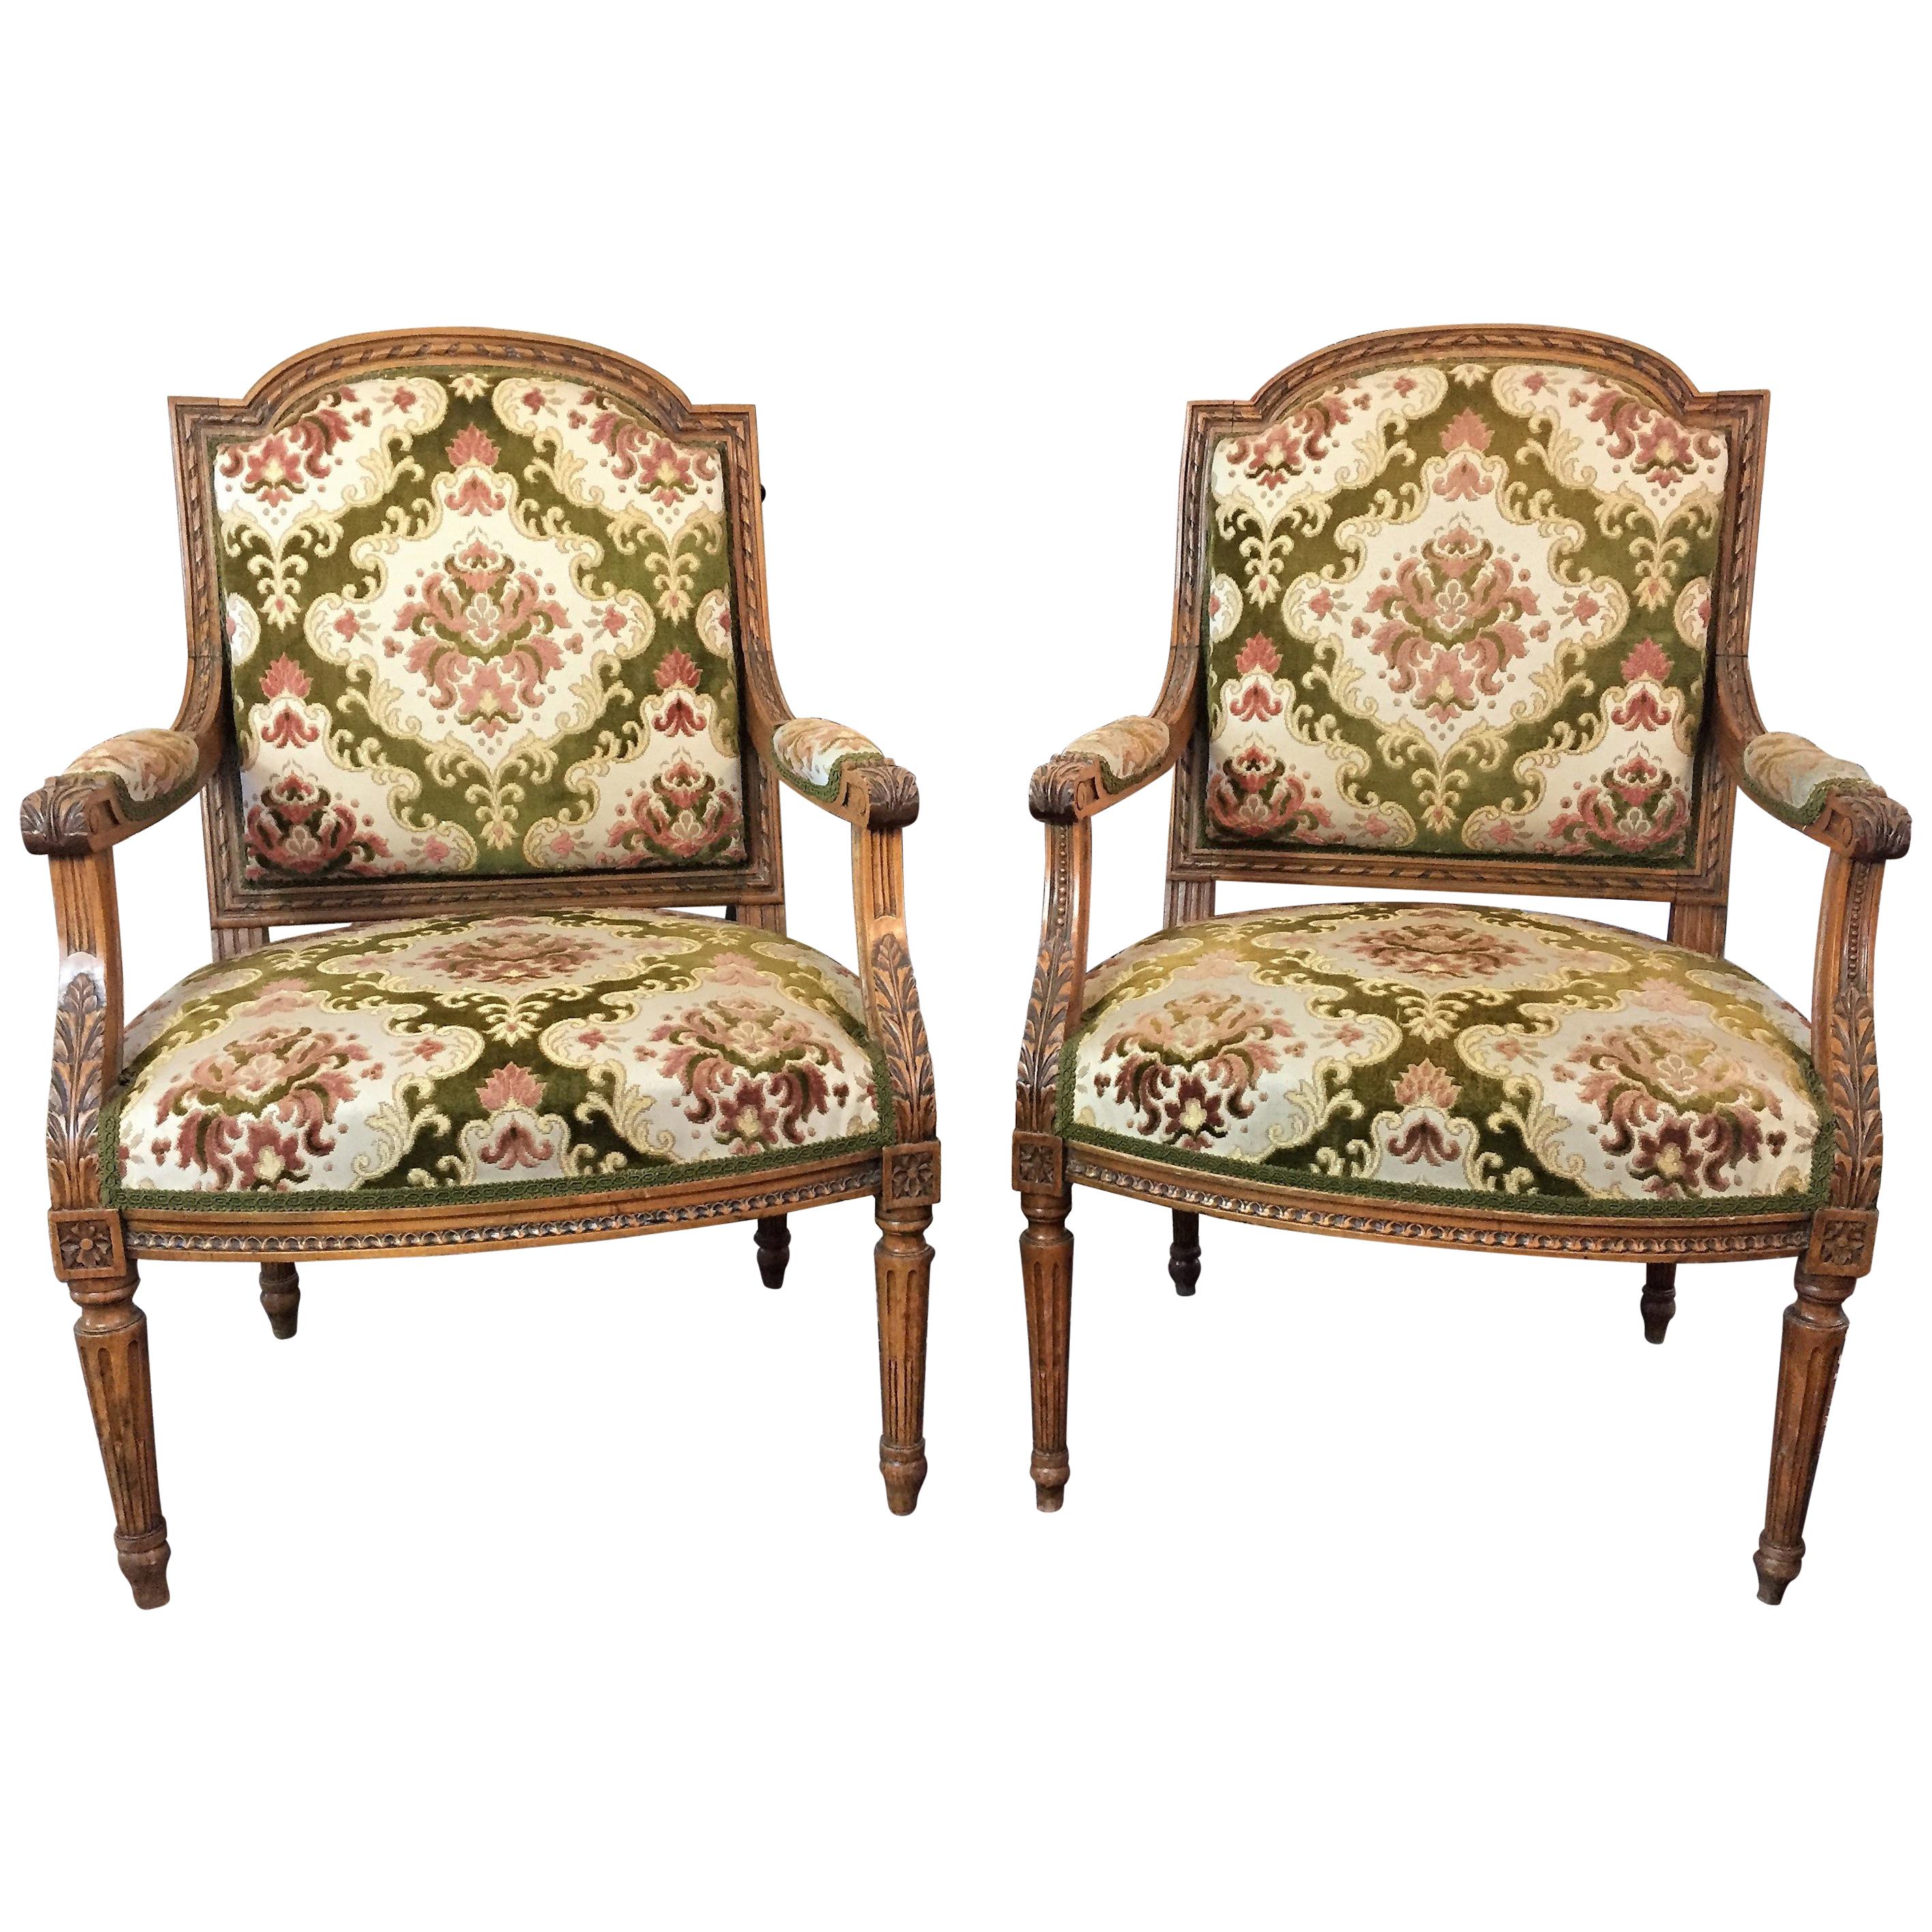 Pair of Louis XVI Style Beech Armchairs in Green and Pink Fabric, circa 1880